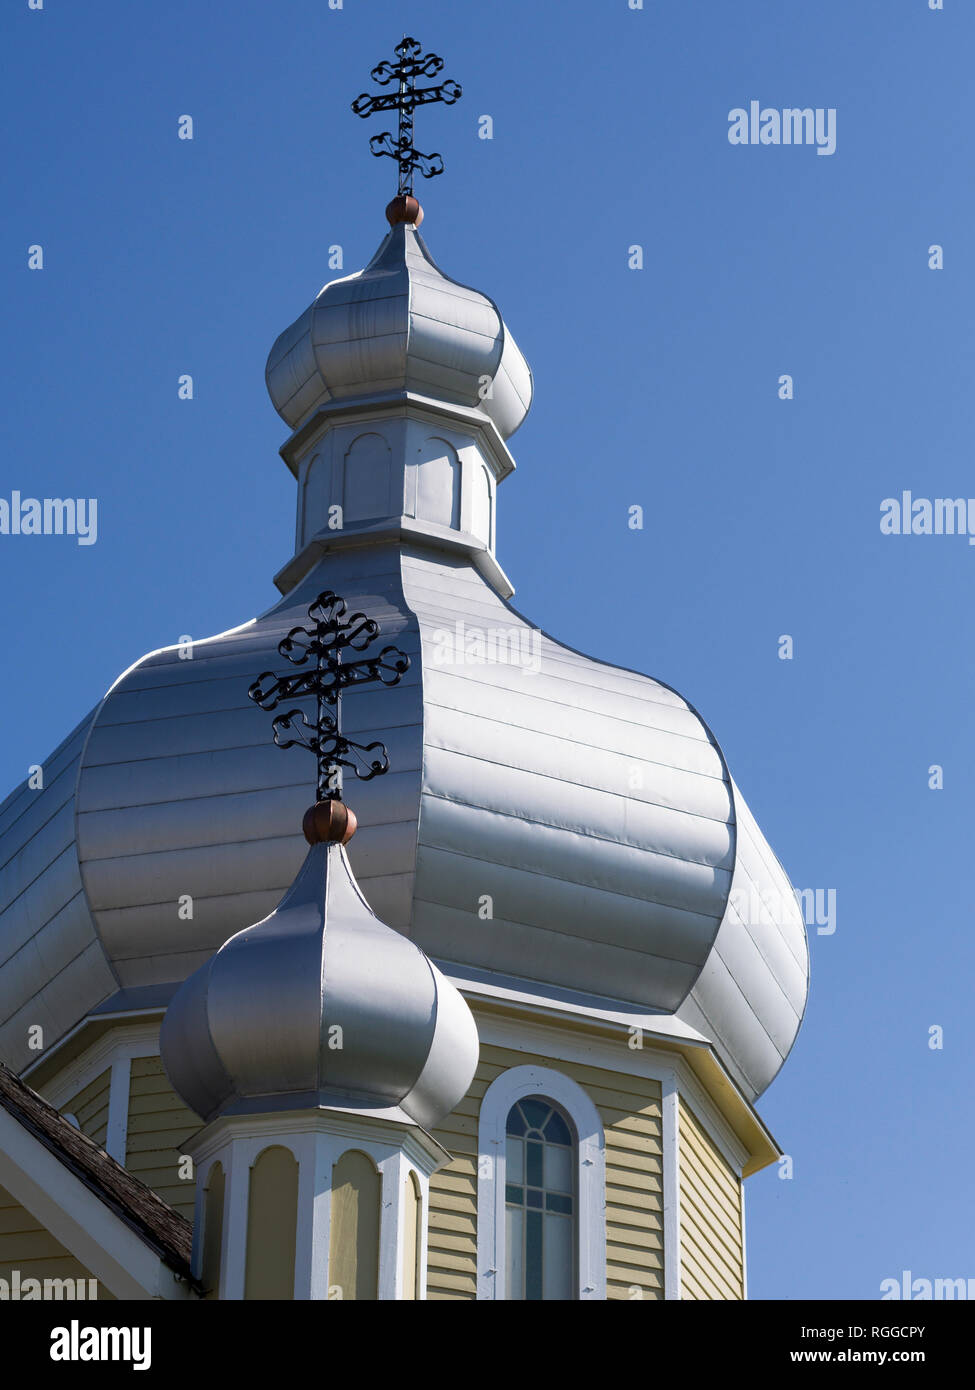 Onion Domes of the Church at the Ukranian Folk Museum: Two domes topped by eastern crosses decorate the roof of the church that is part of this heritage folk museum near Edmonton. Stock Photo